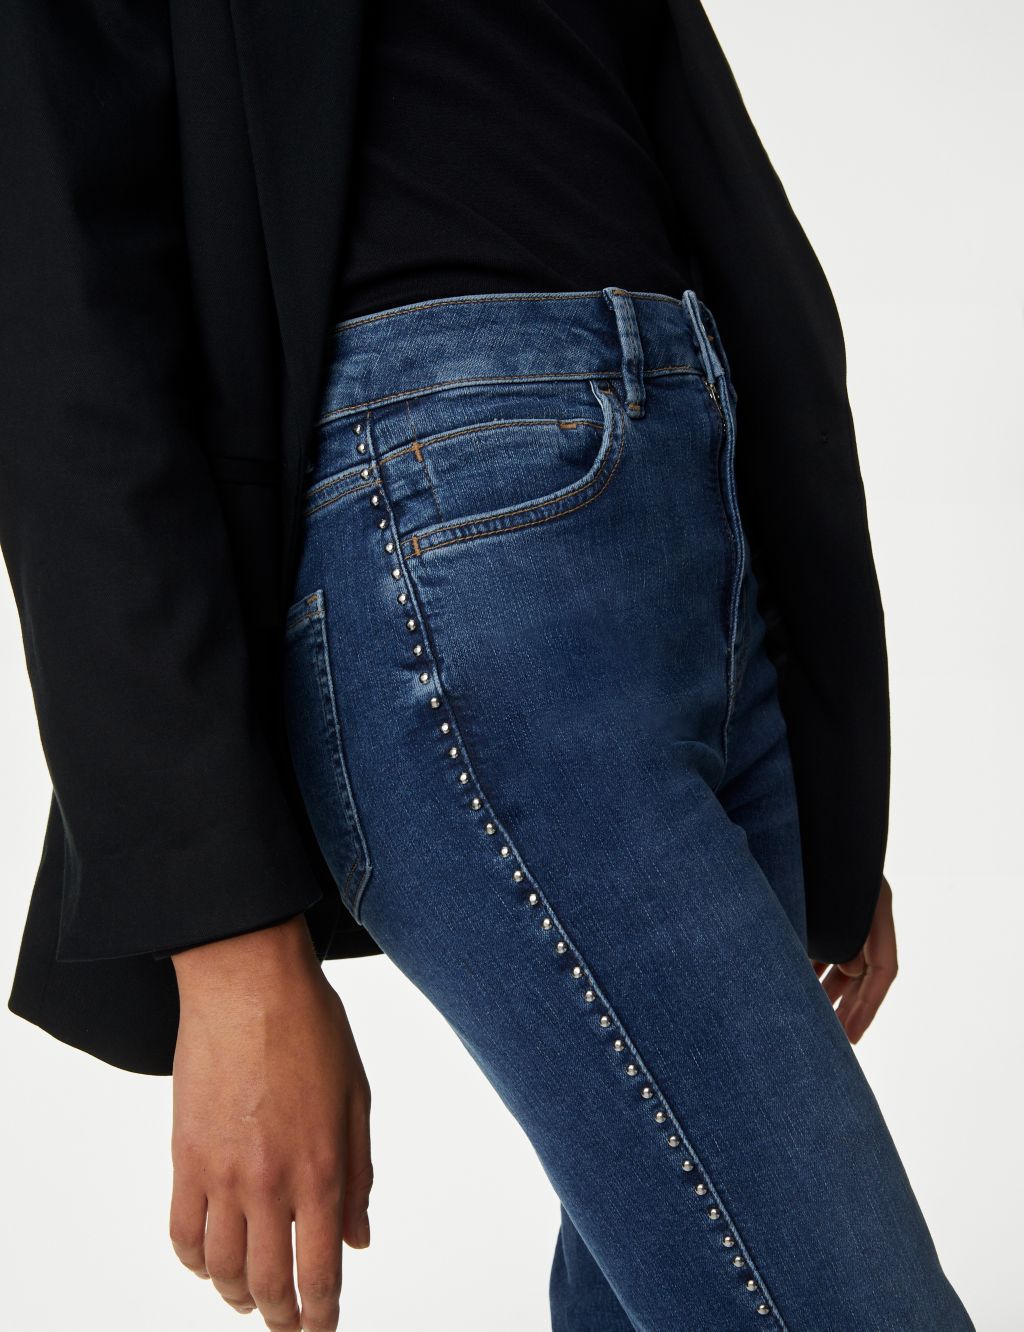 Eva High Waisted Stud Detail Bootcut Jeans image 3